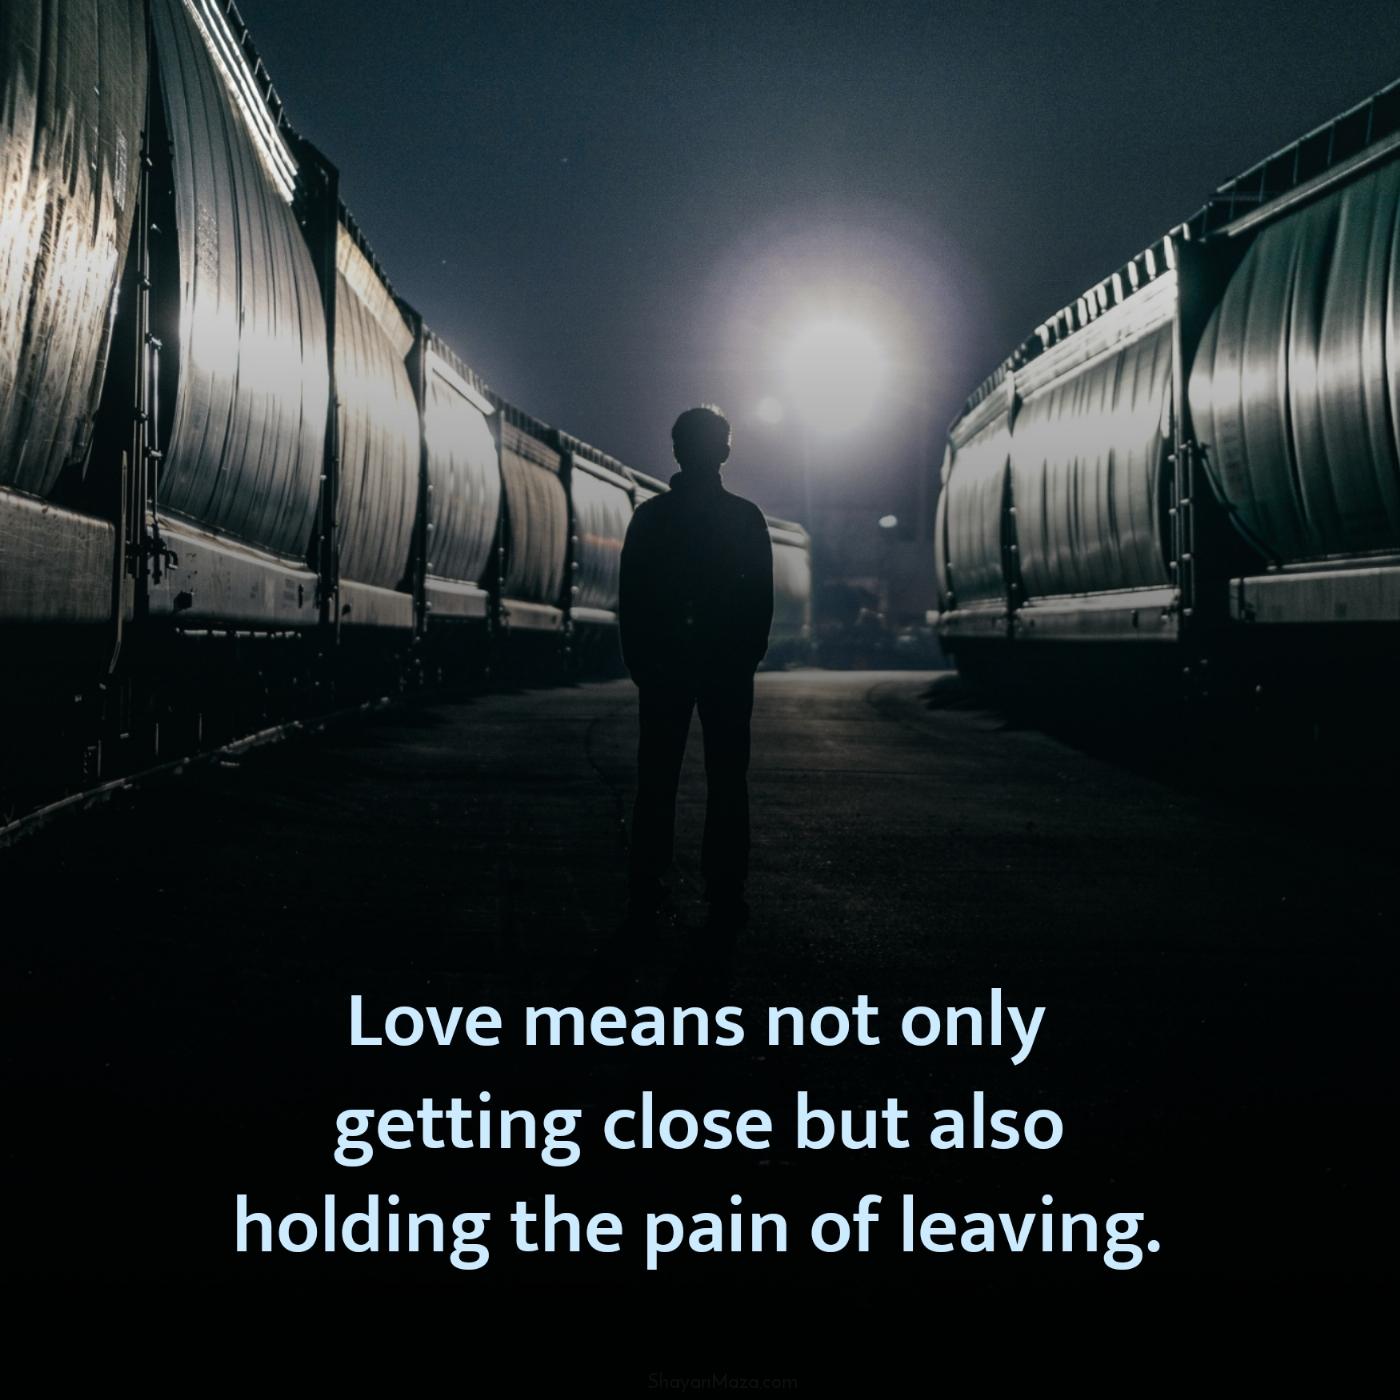 Love means not only getting close but also holding the pain